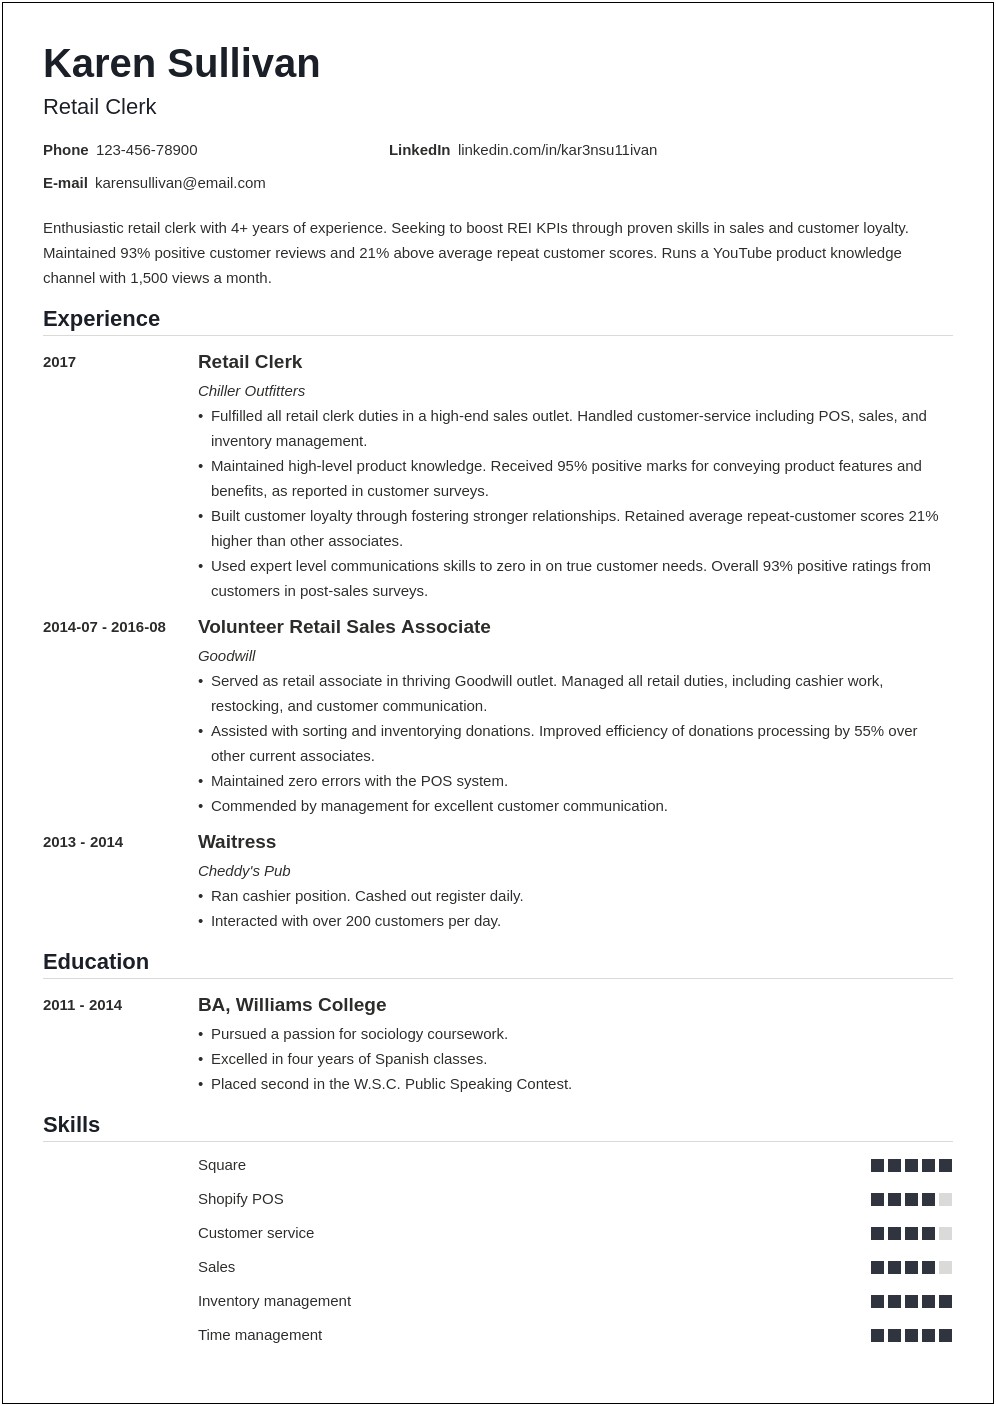 Resume Objective Part Time Retail Job